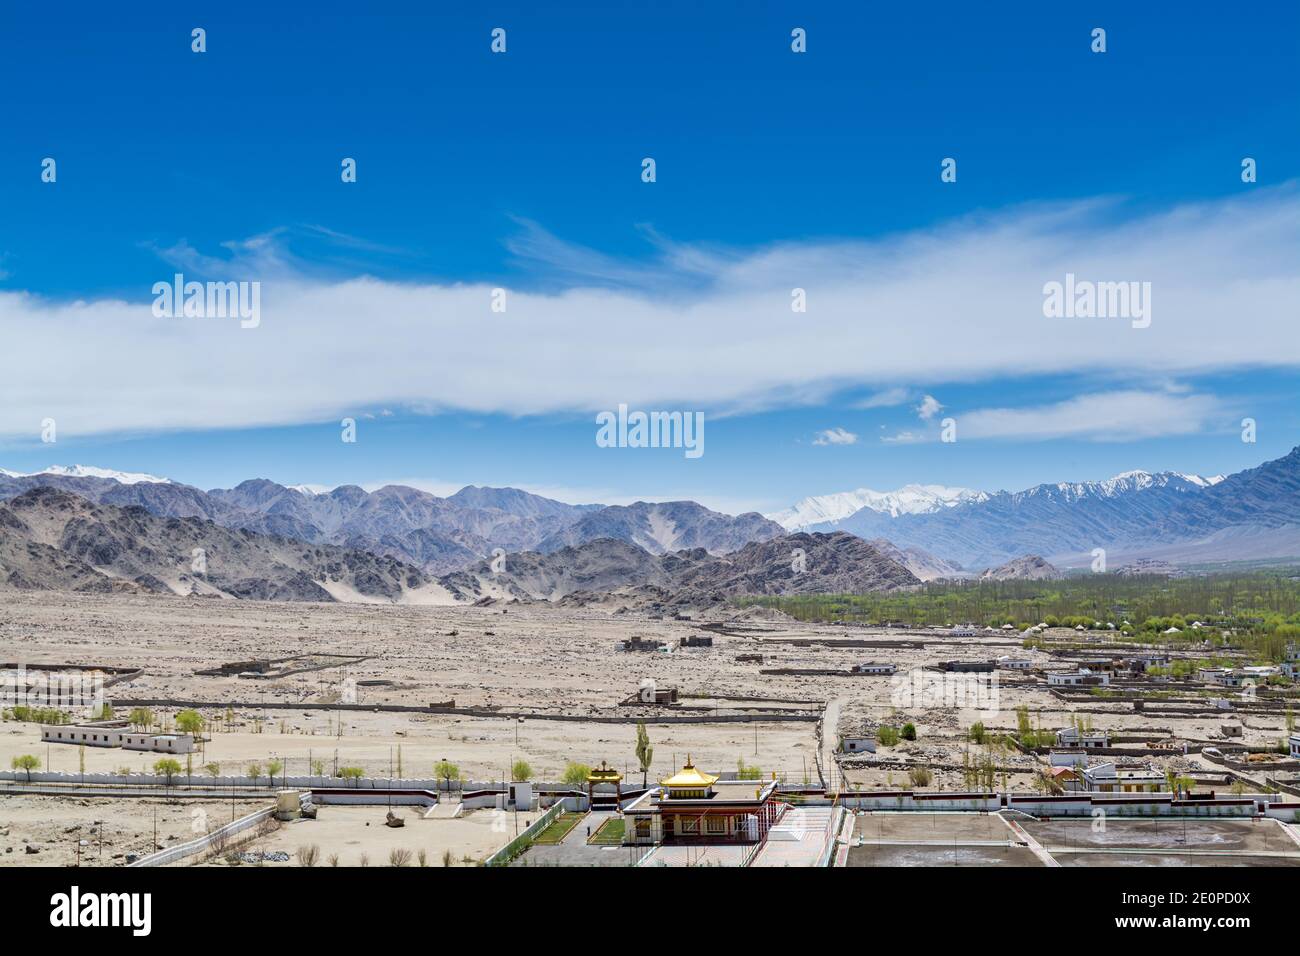 Beautiful landscape with fields, Tibetian buildings, snow mountains, and blue sky,  in Ladakh, Kashmir, view from Thiksey Monastery or Thiksey Gompa Stock Photo